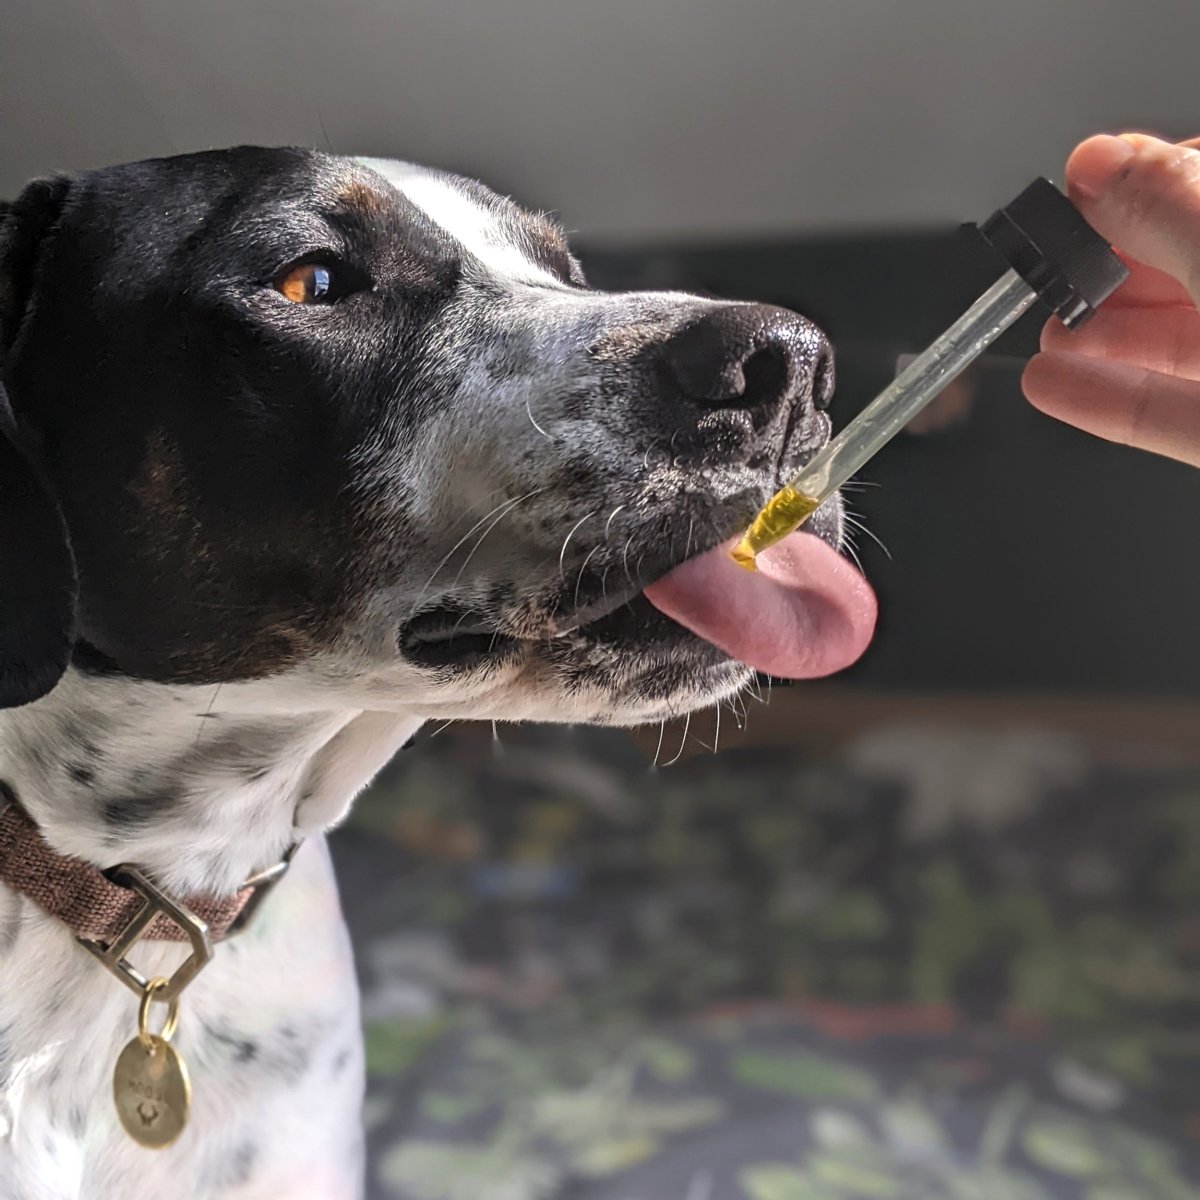 5 Things To Know Before Giving Your Pet CBD - Hemp Well